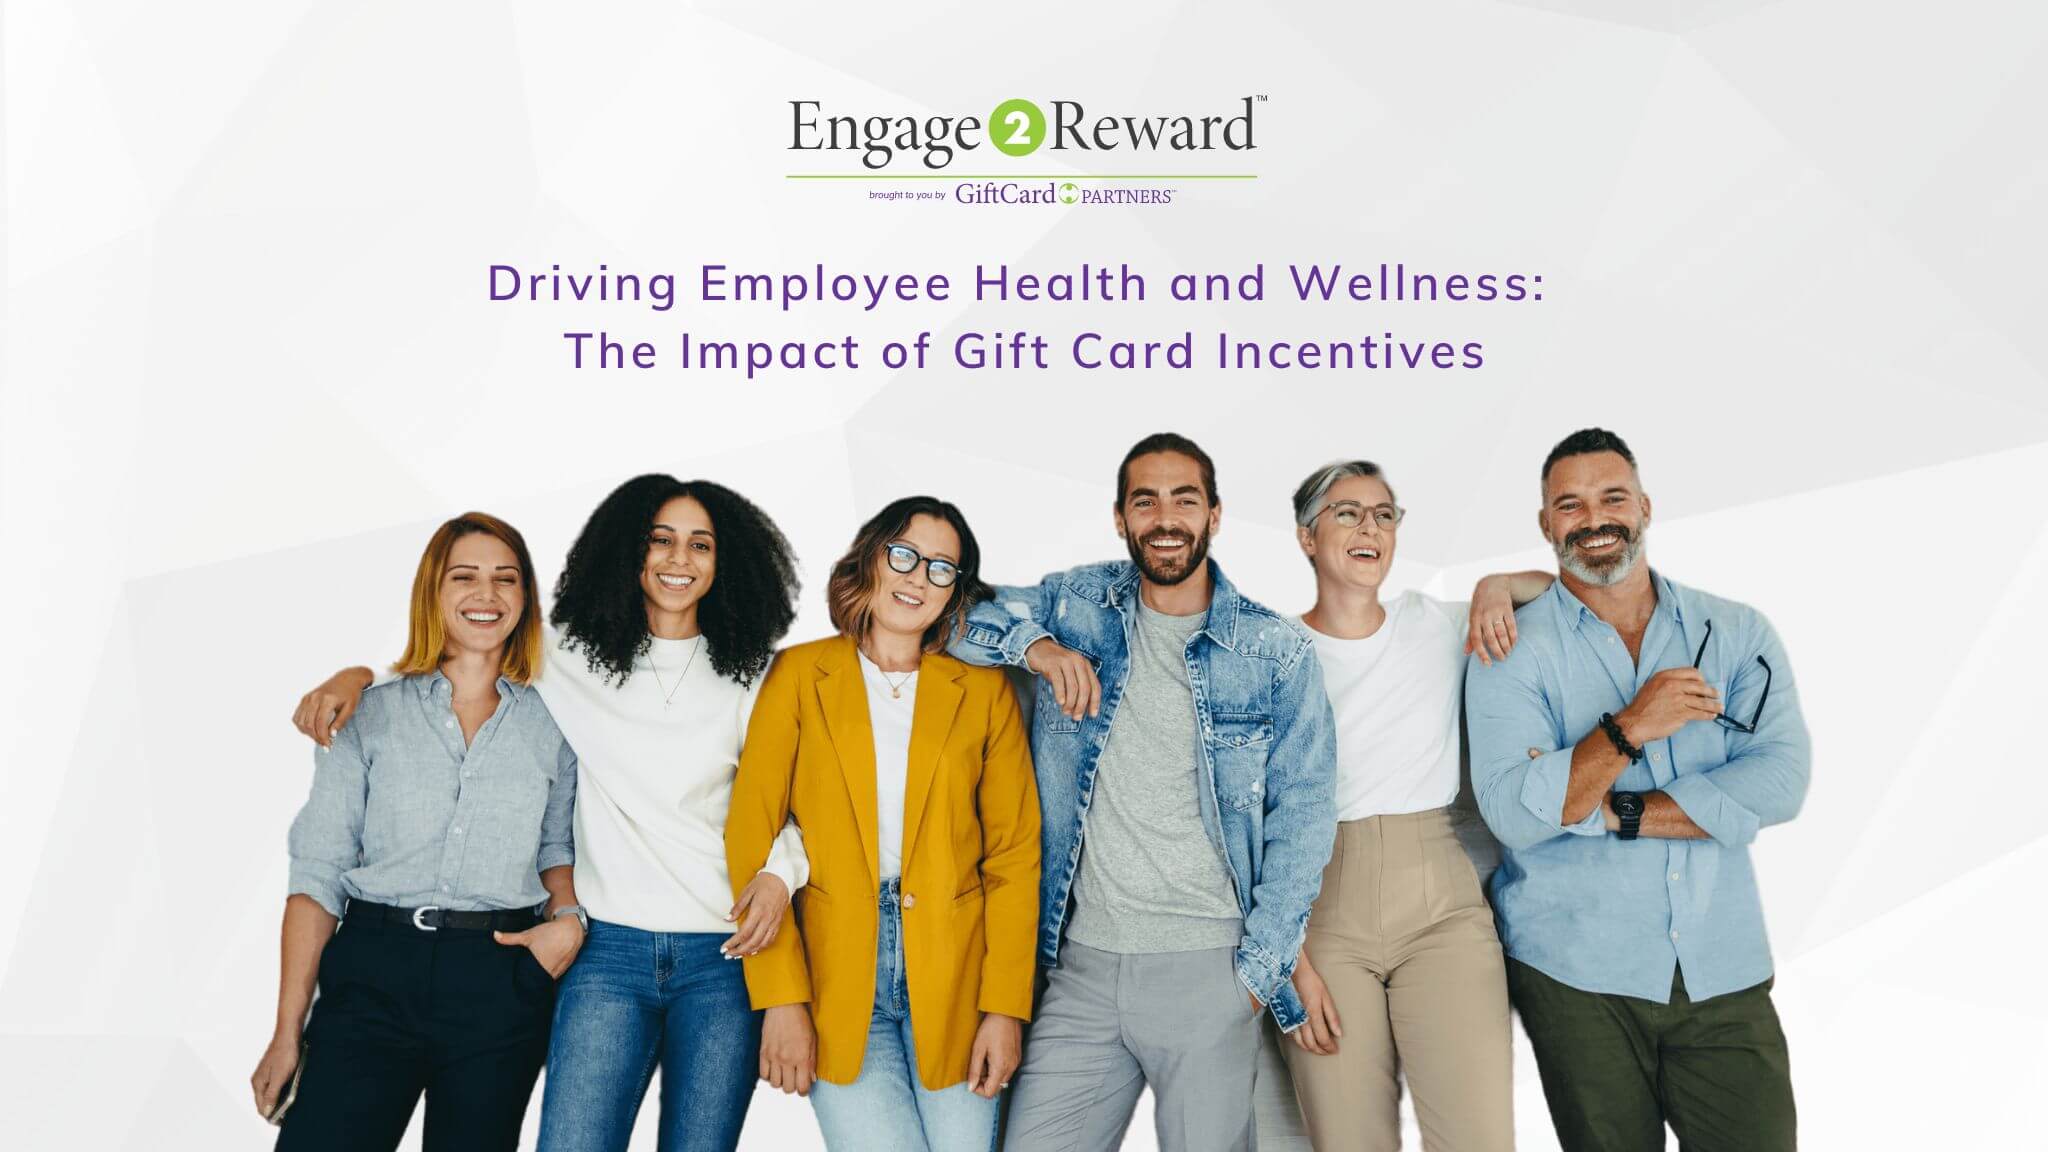 Driving Employee Health and Wellness: The Impact of Gift Card Incentives